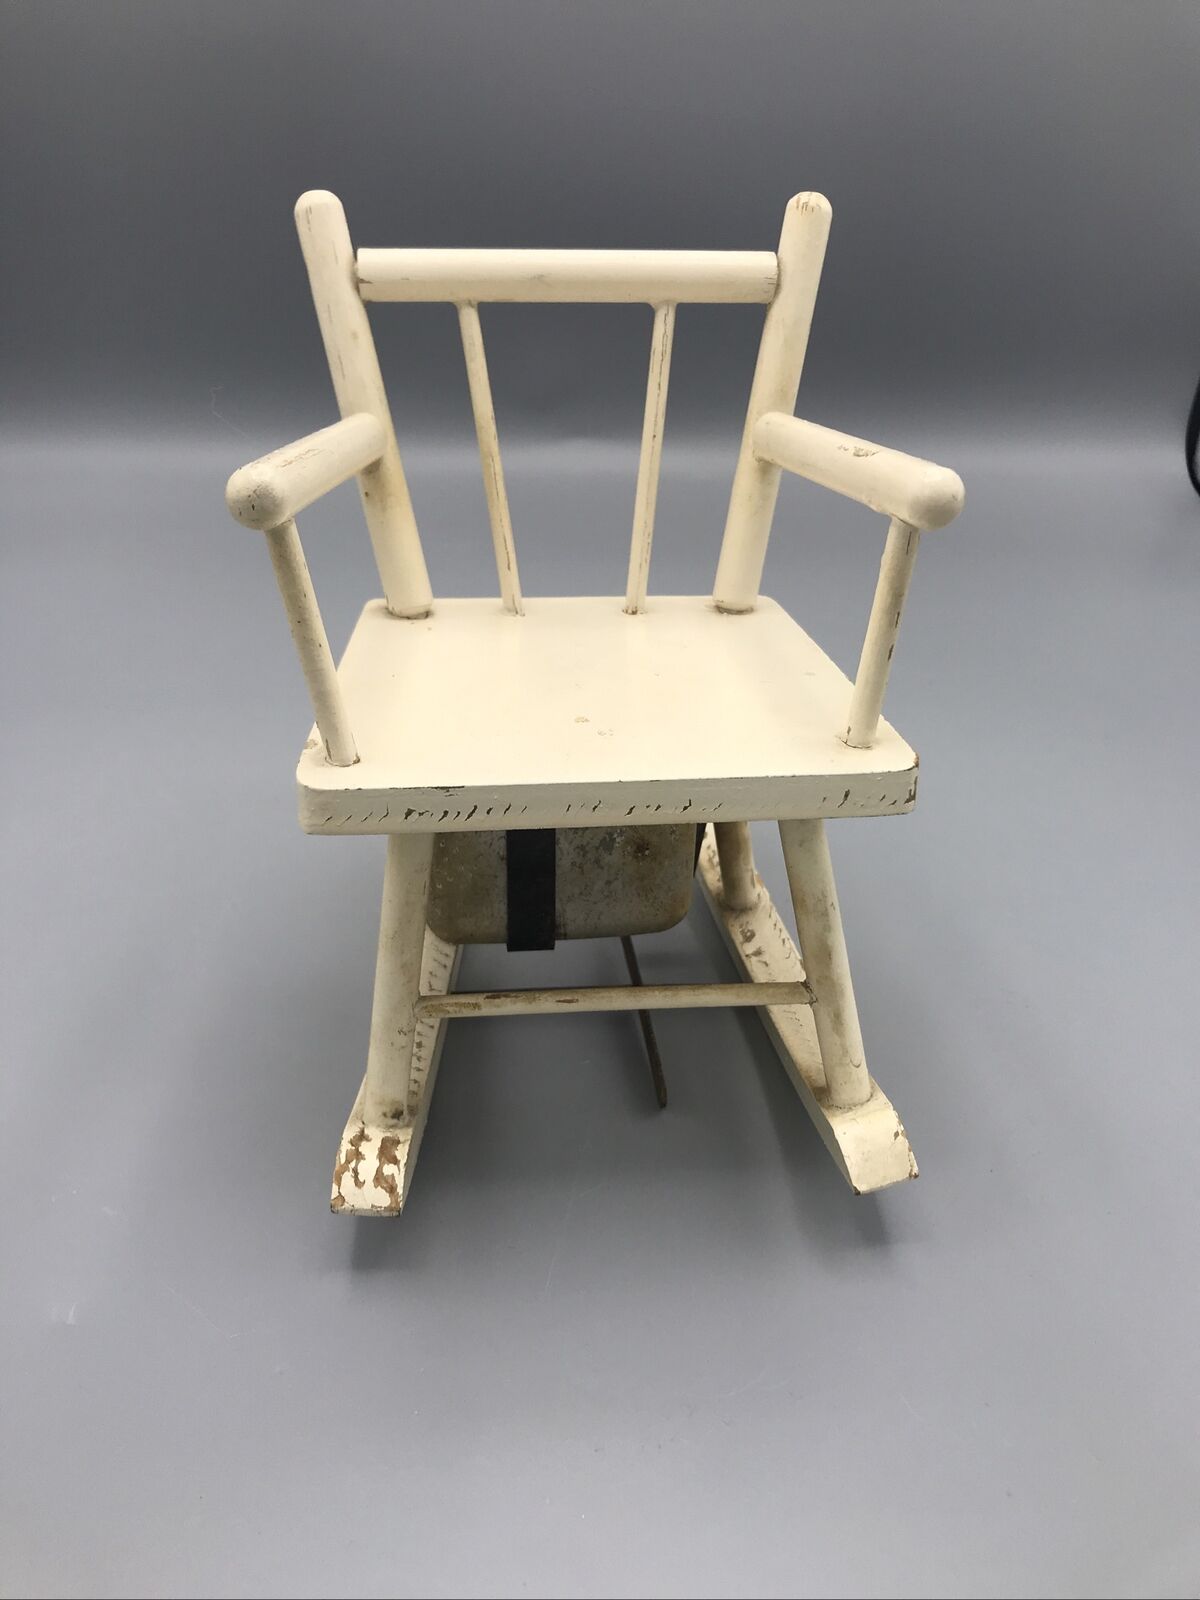 Vintage White Wood Rocking Chair Music Box - Rock A By Baby - Chair Rocks